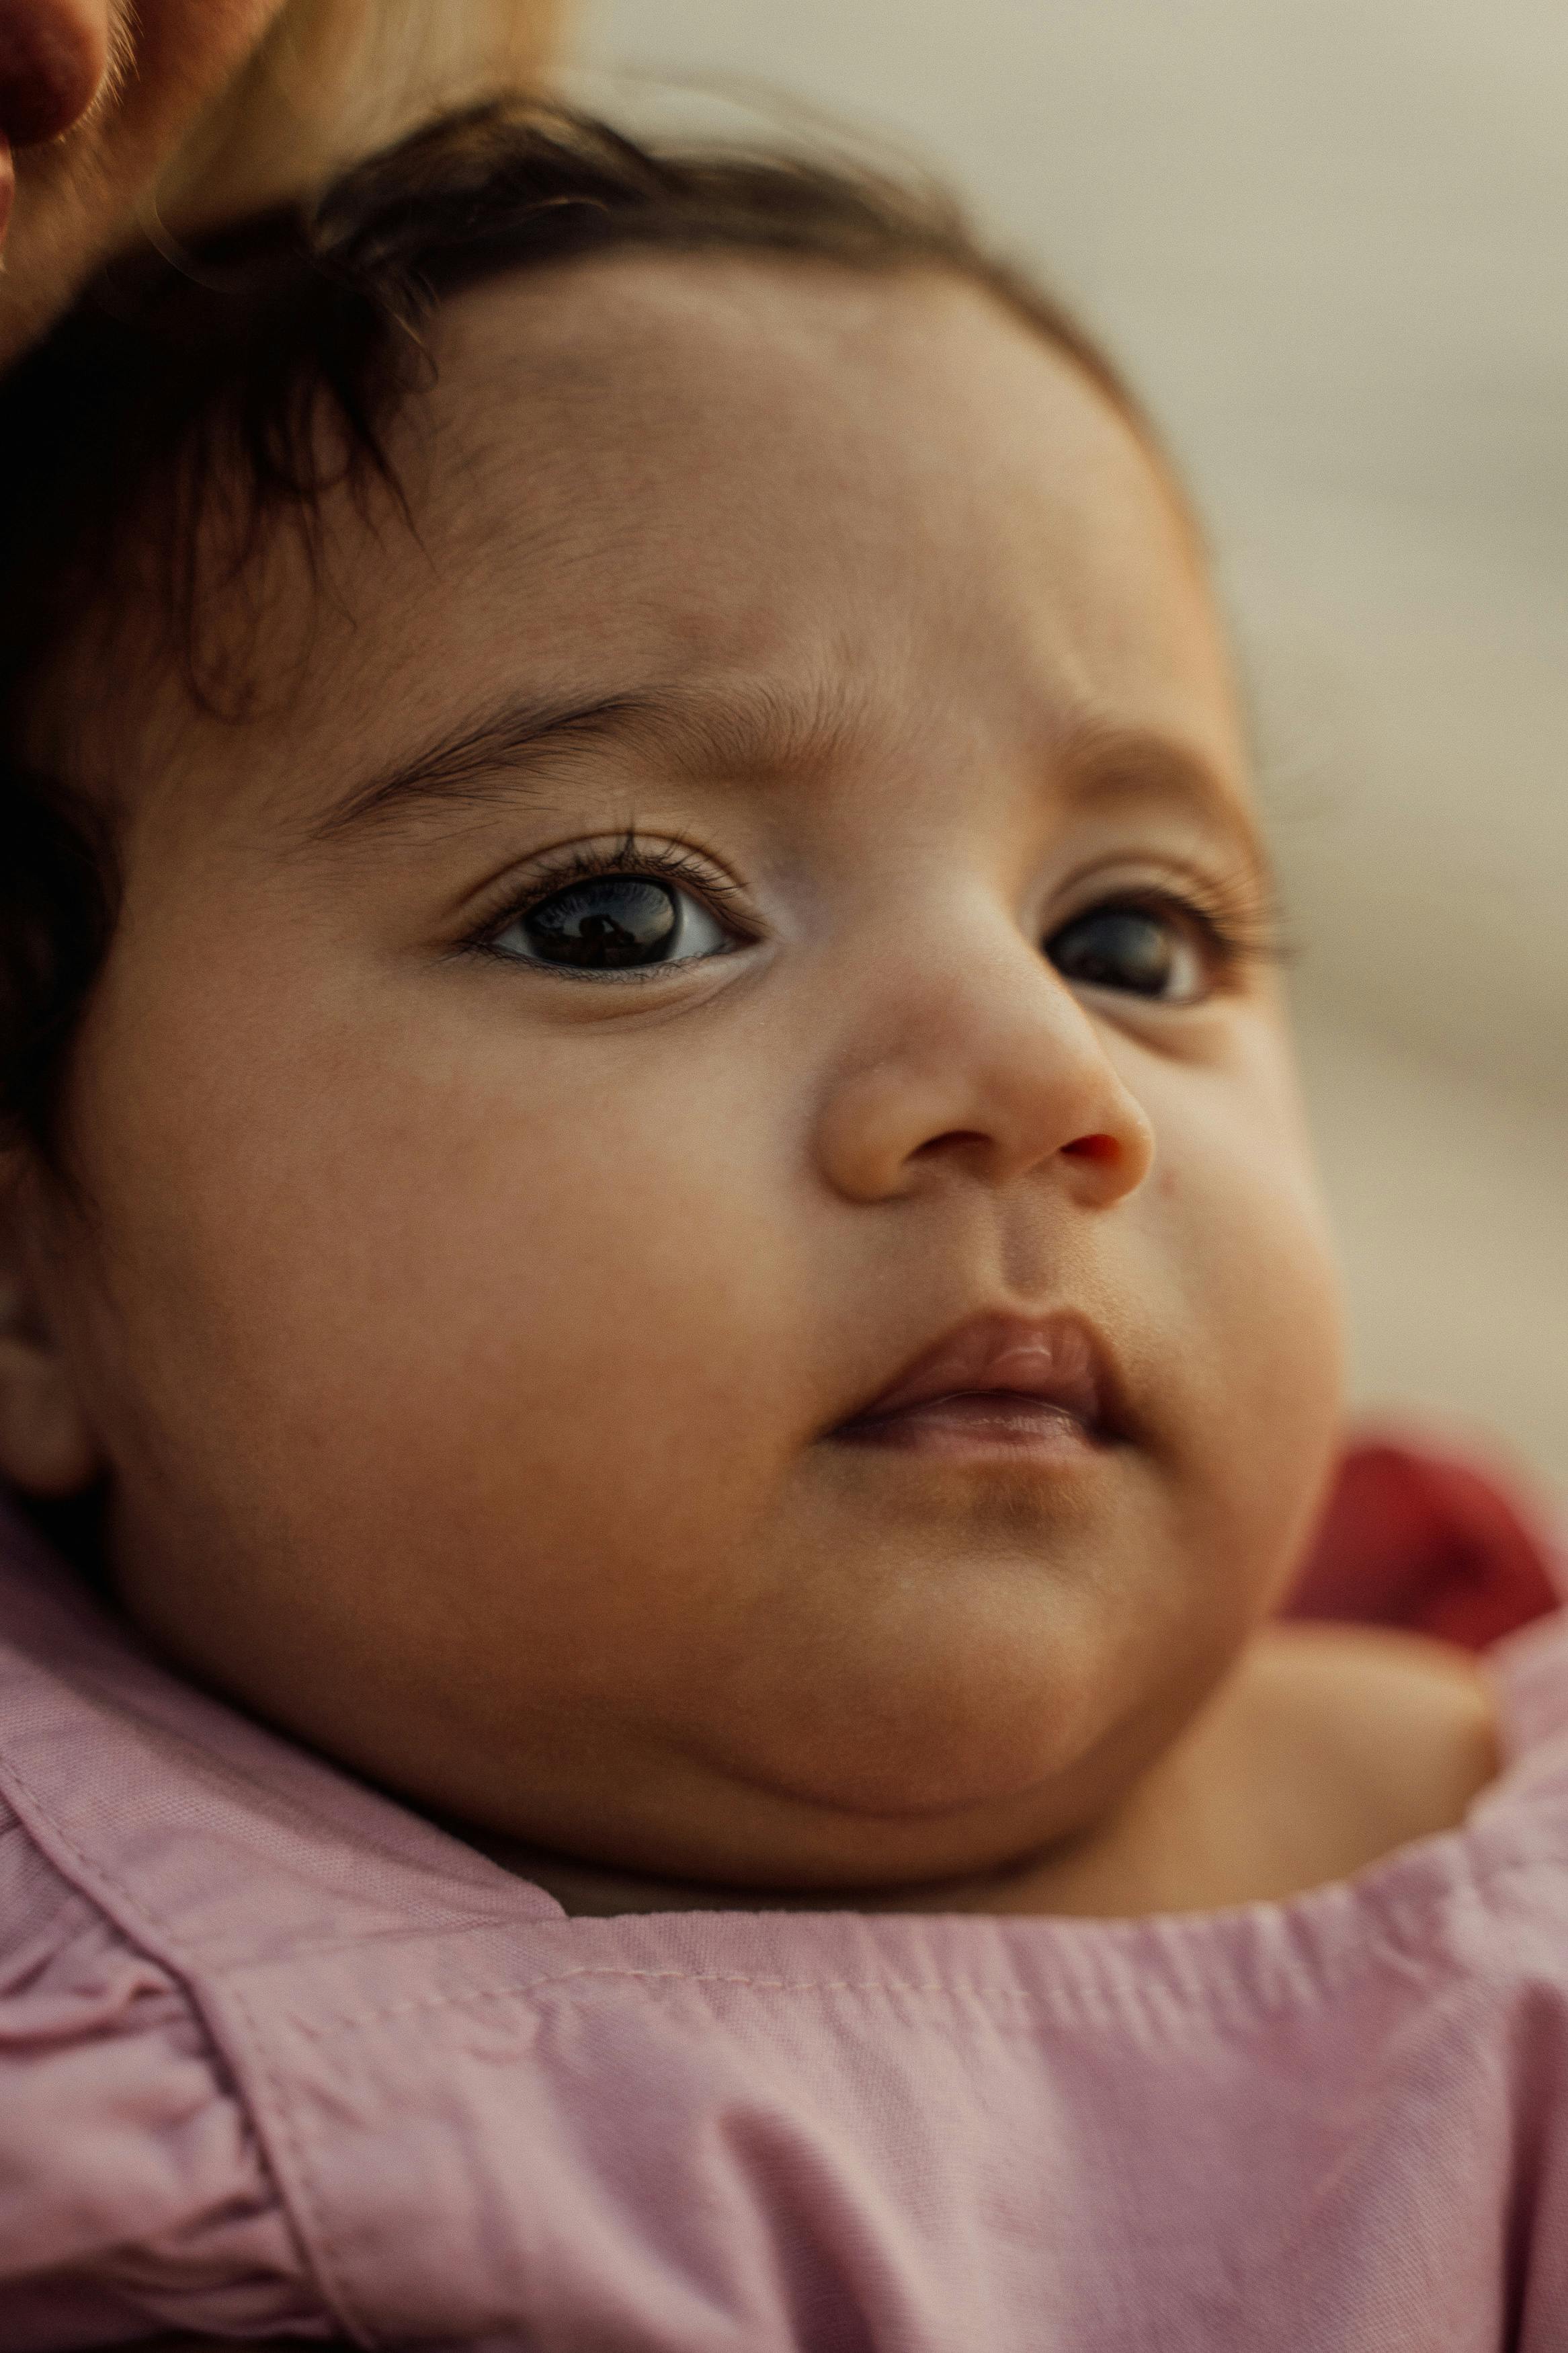 close up photo of a baby wearing a pink top